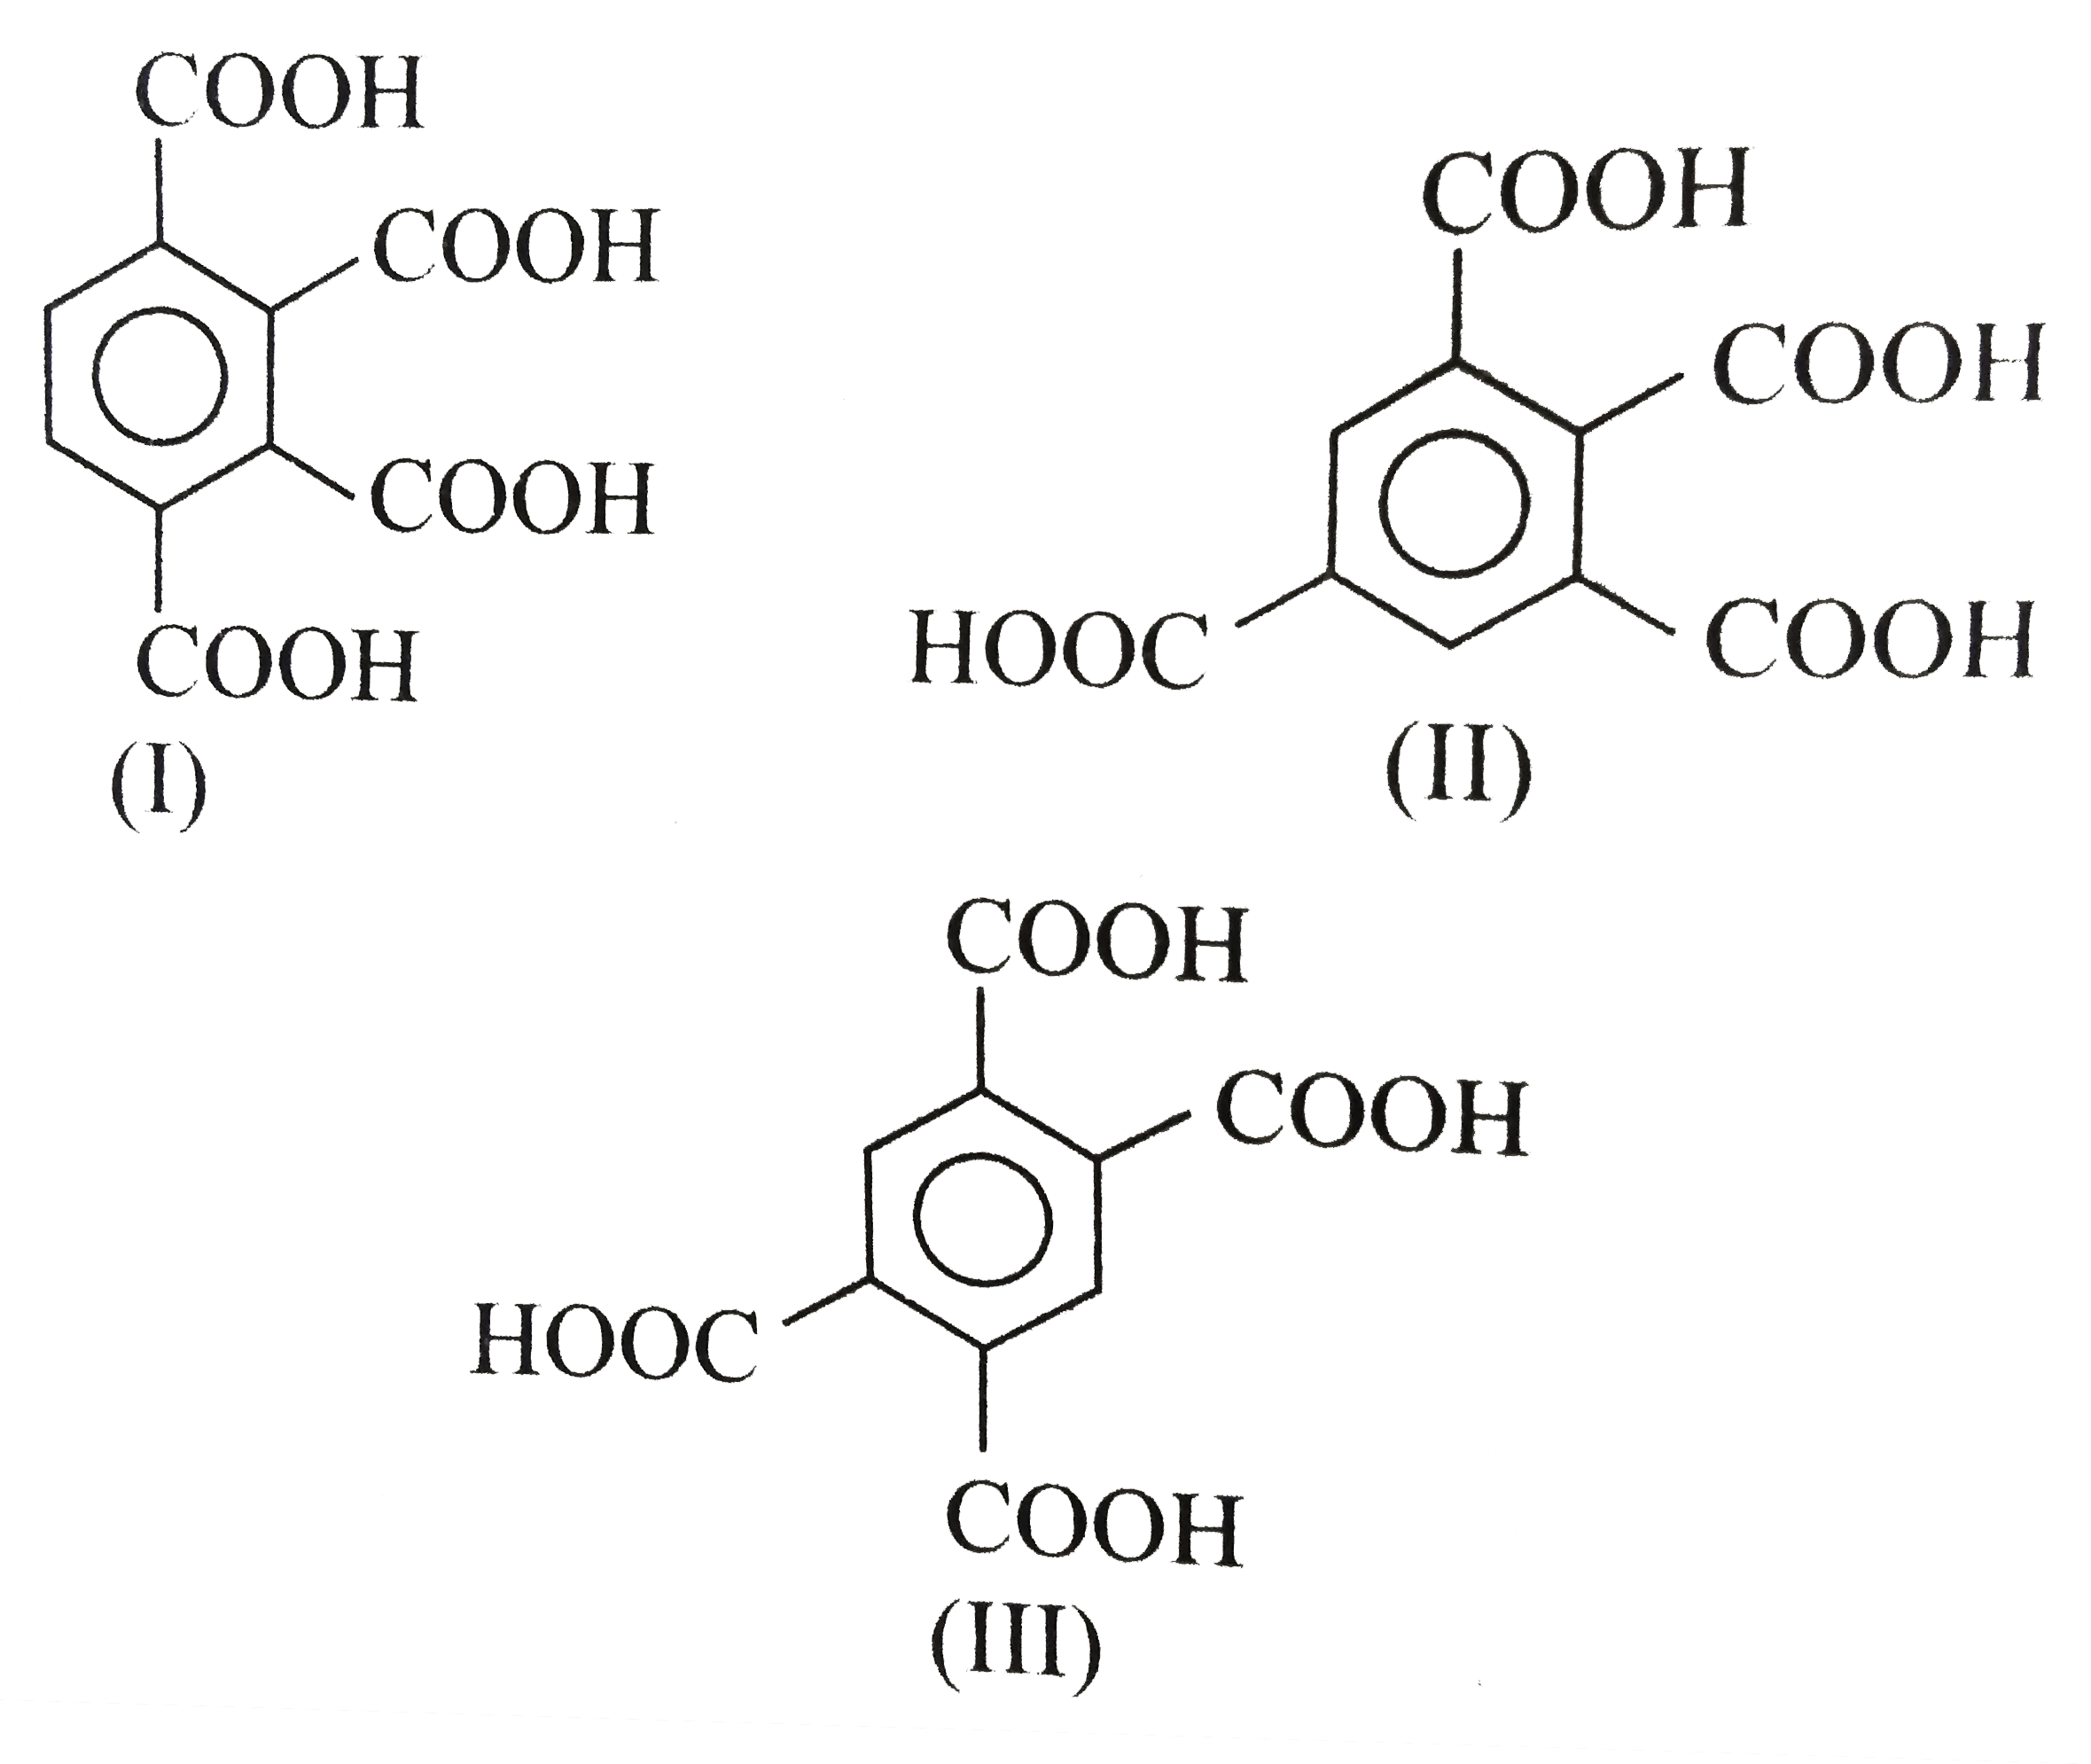 Three isomeric tetracarboxylic acids (I),(II), and (III) are given.      They can be distinguised by anhydride formation by treating with one equivalent and two equivalents of SOCl2.   Which tetracarboxylic acid on reaction with one equivalent of SOCl2 gives two isomeric monoanhydrides ?